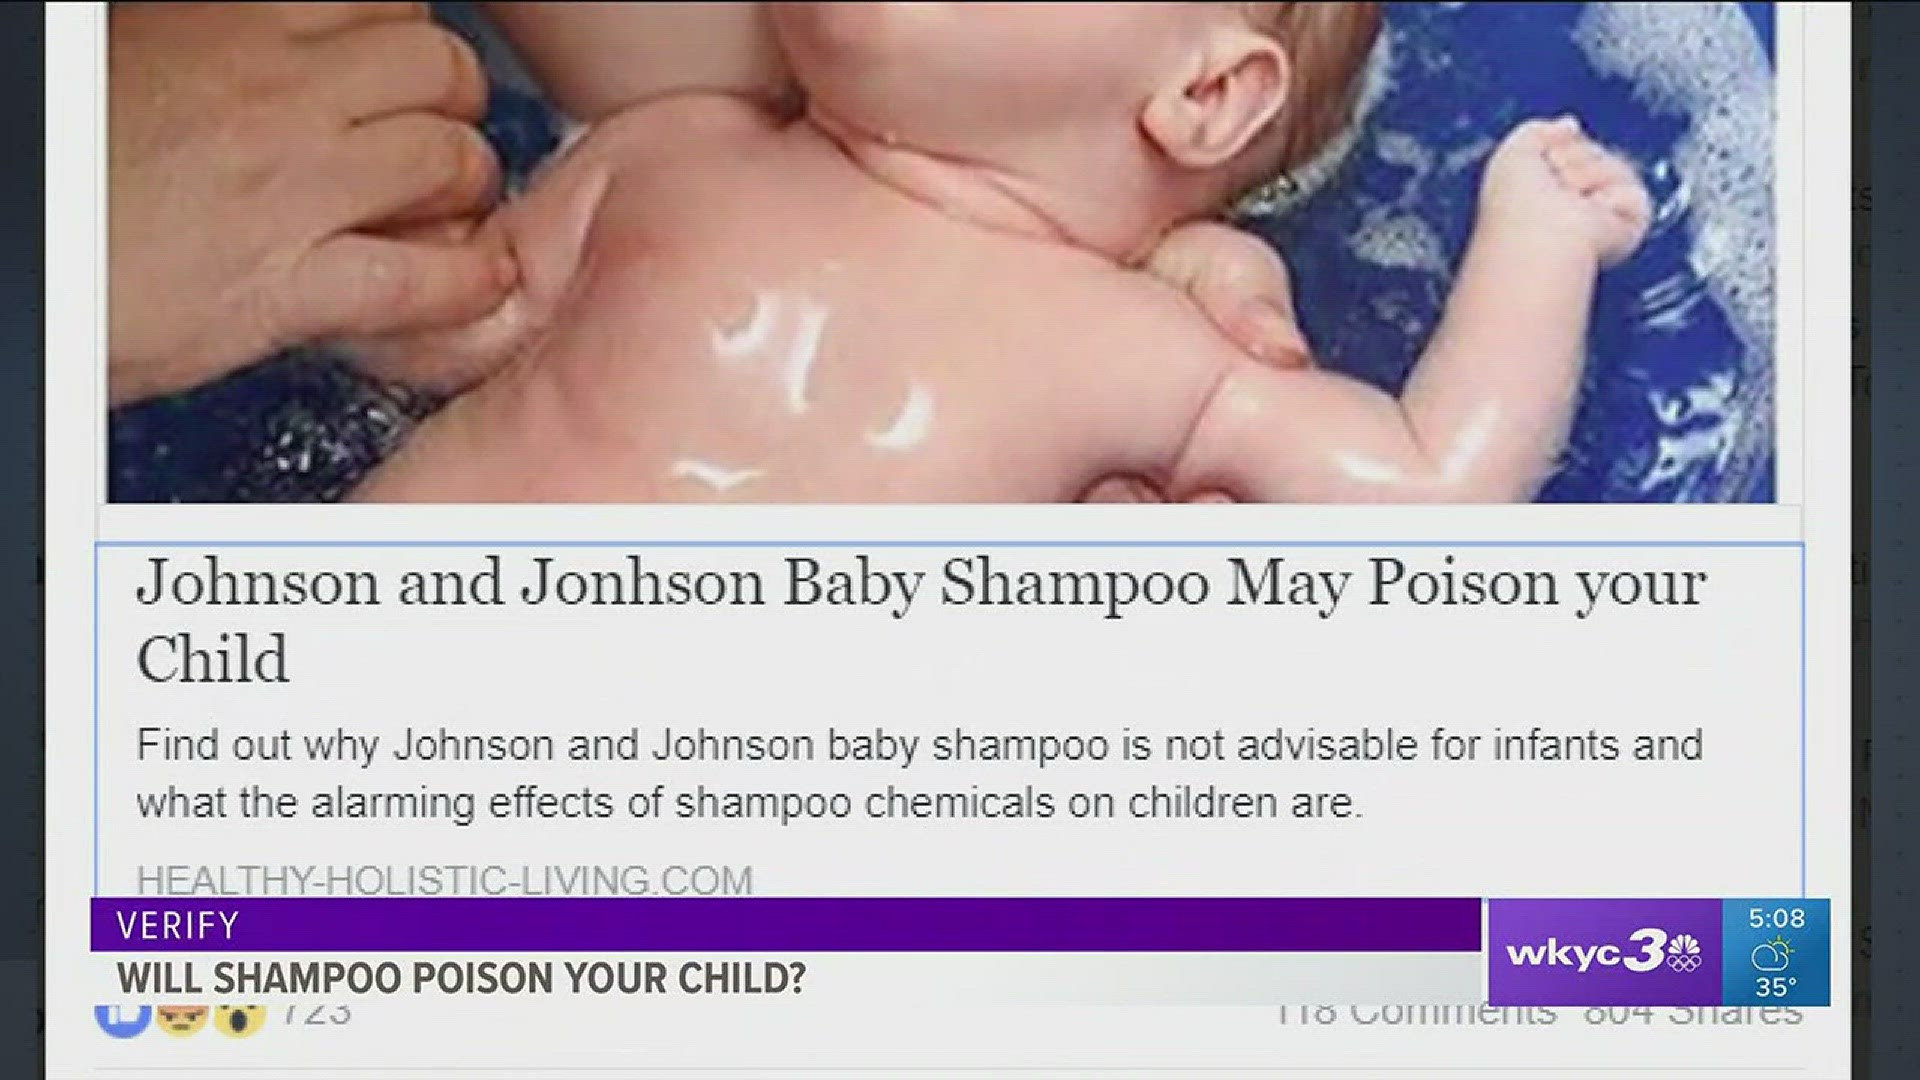 VERIFY: Are there toxins in Johnson & Johnson's baby shampoo?